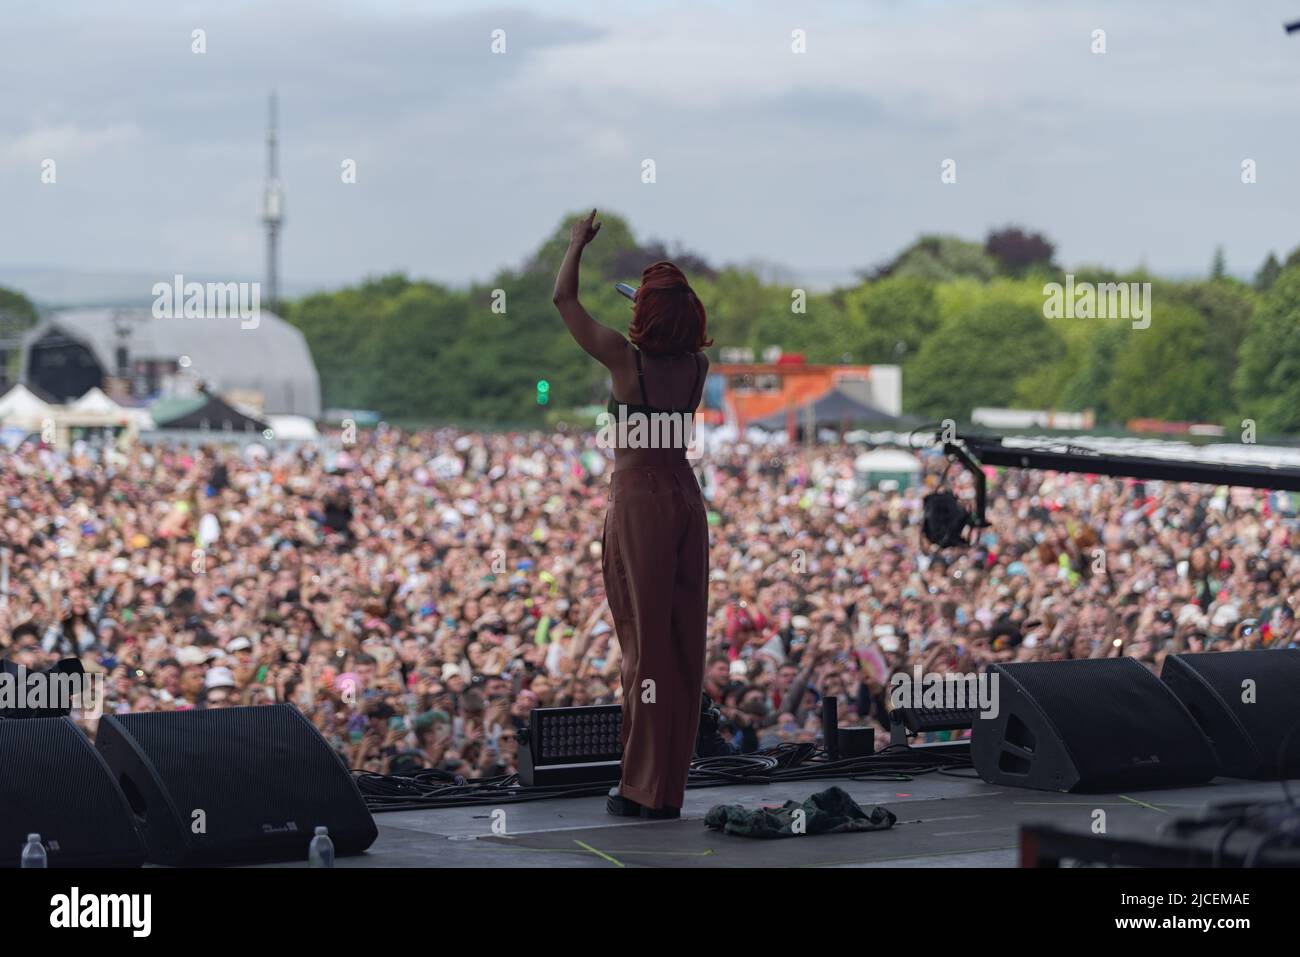 Manchester, England, 12 Jun 2022, RAYE performing with her band at Parklife Festival in Manchester, Nigel R Glasgow/Alamy Live News Stock Photo